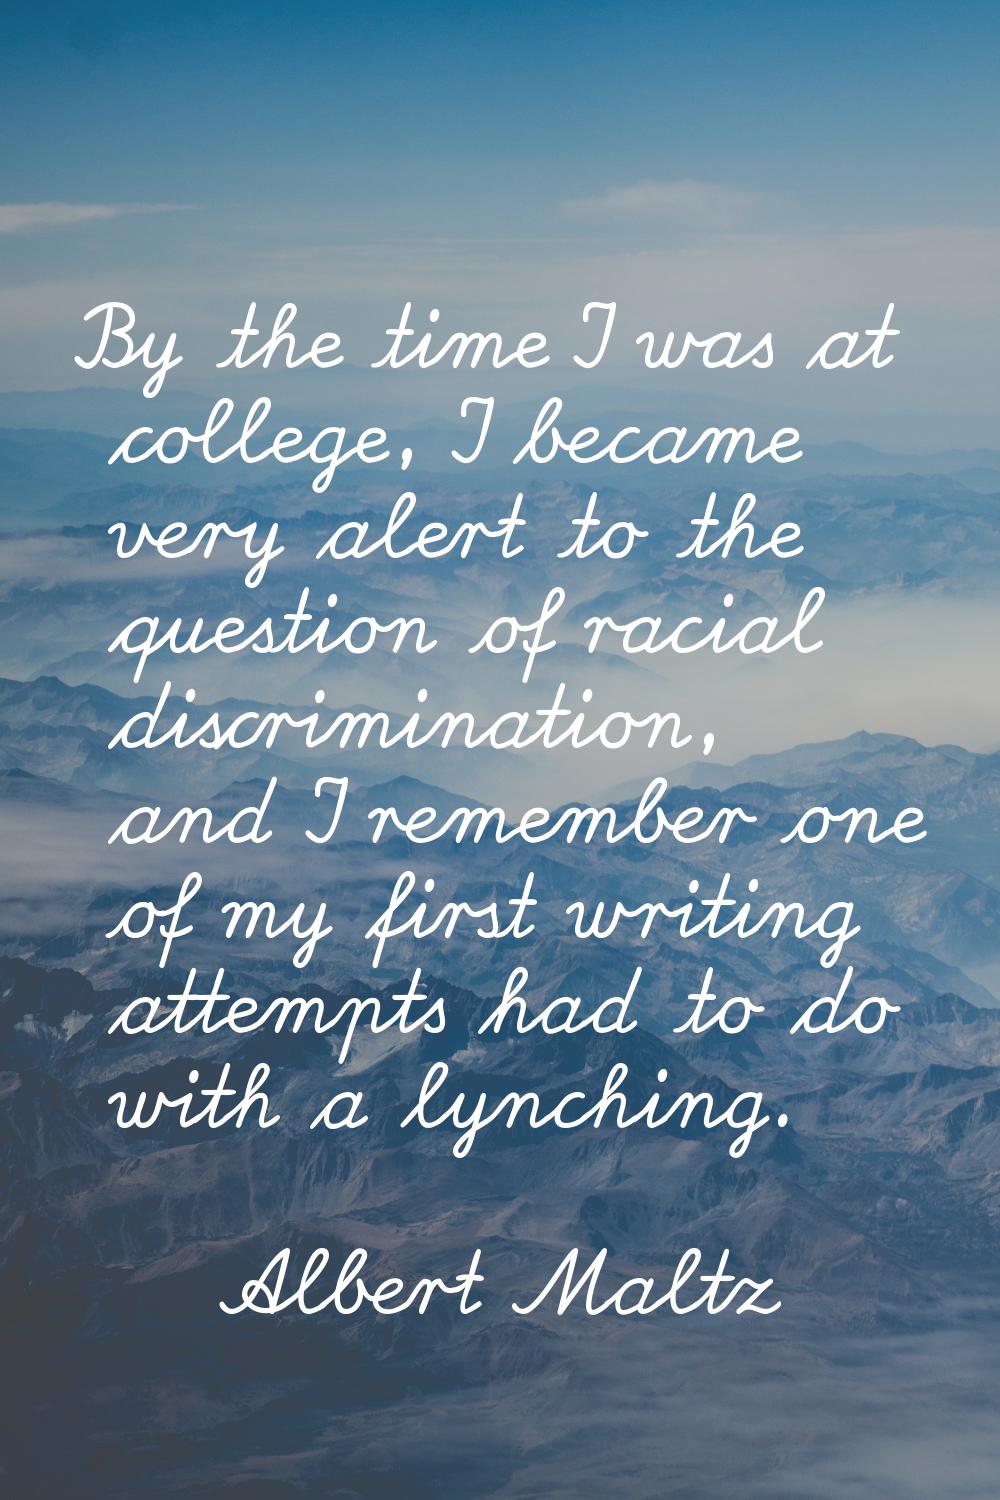 By the time I was at college, I became very alert to the question of racial discrimination, and I r